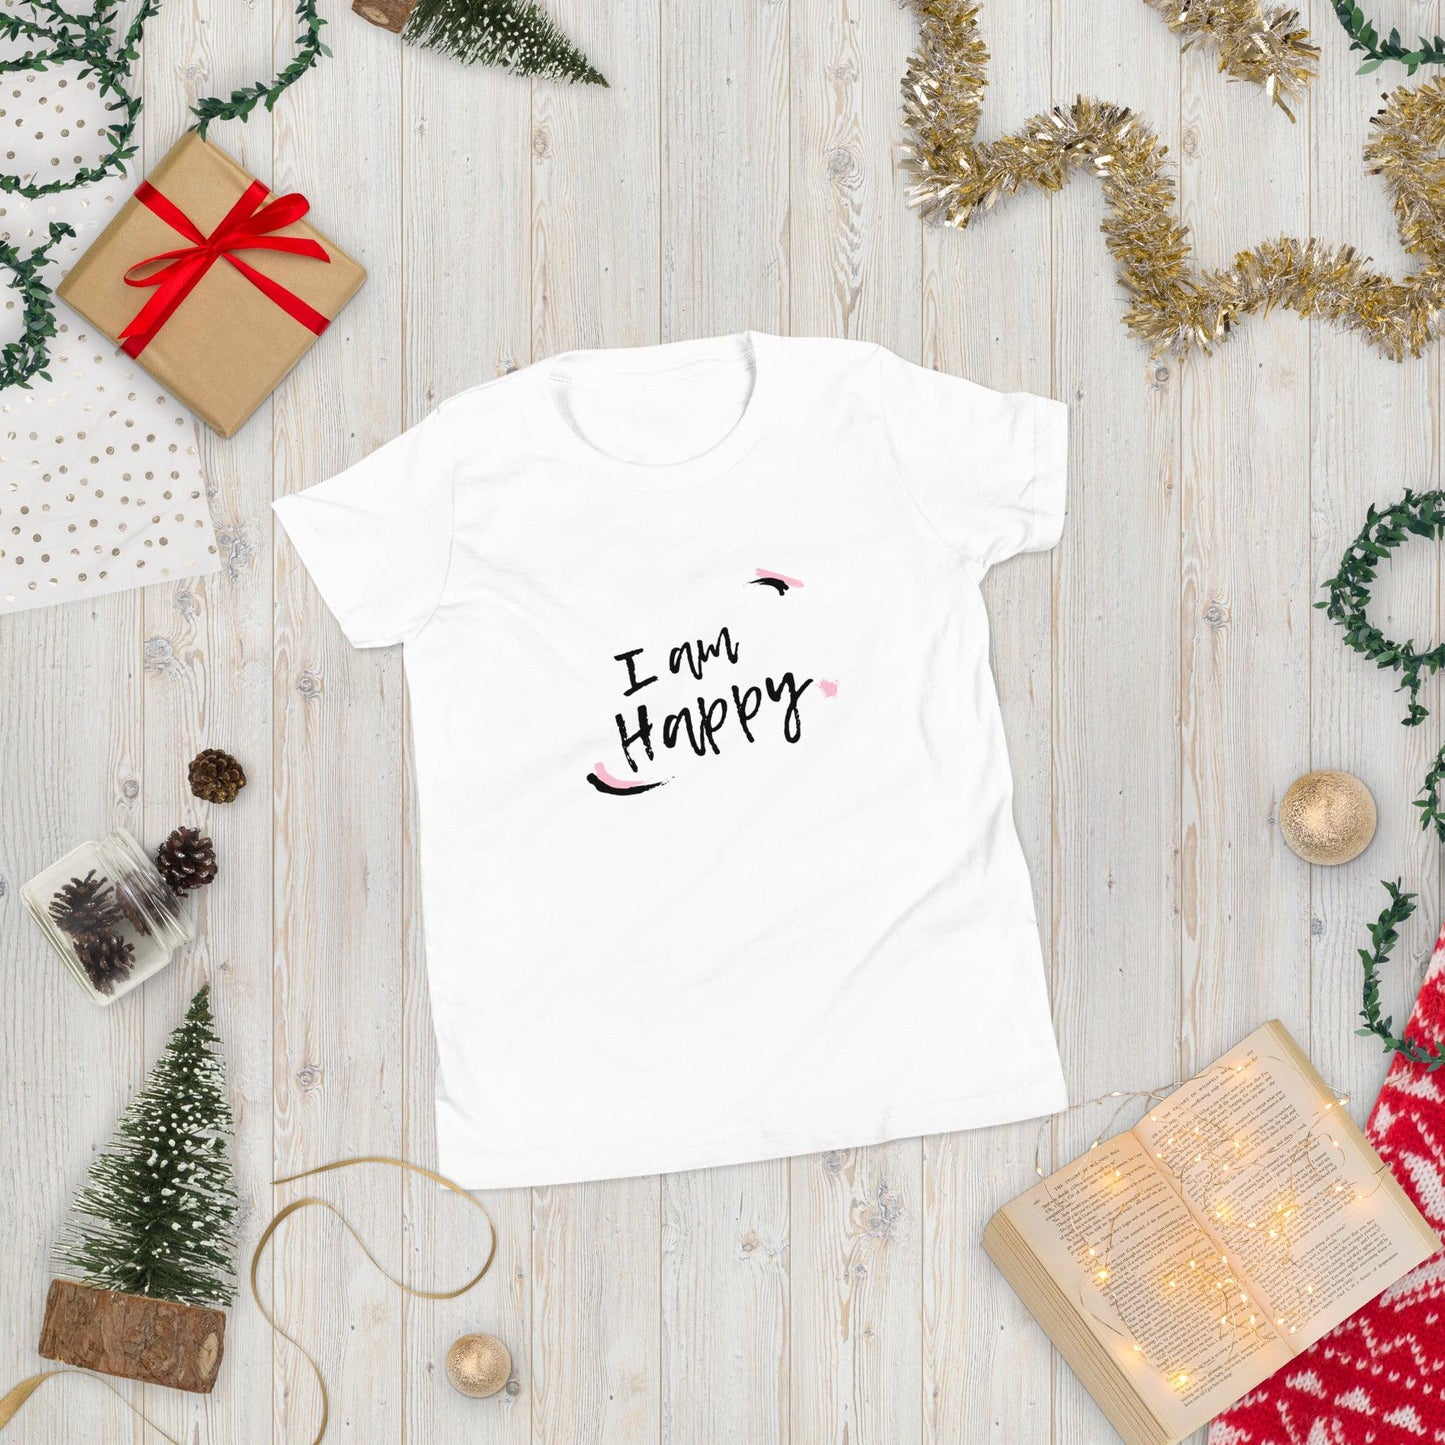 I Am Happy | Youth Short Sleeve T-Shirt | Youth Positive Affirmation T-Shirt - Affirm Effect